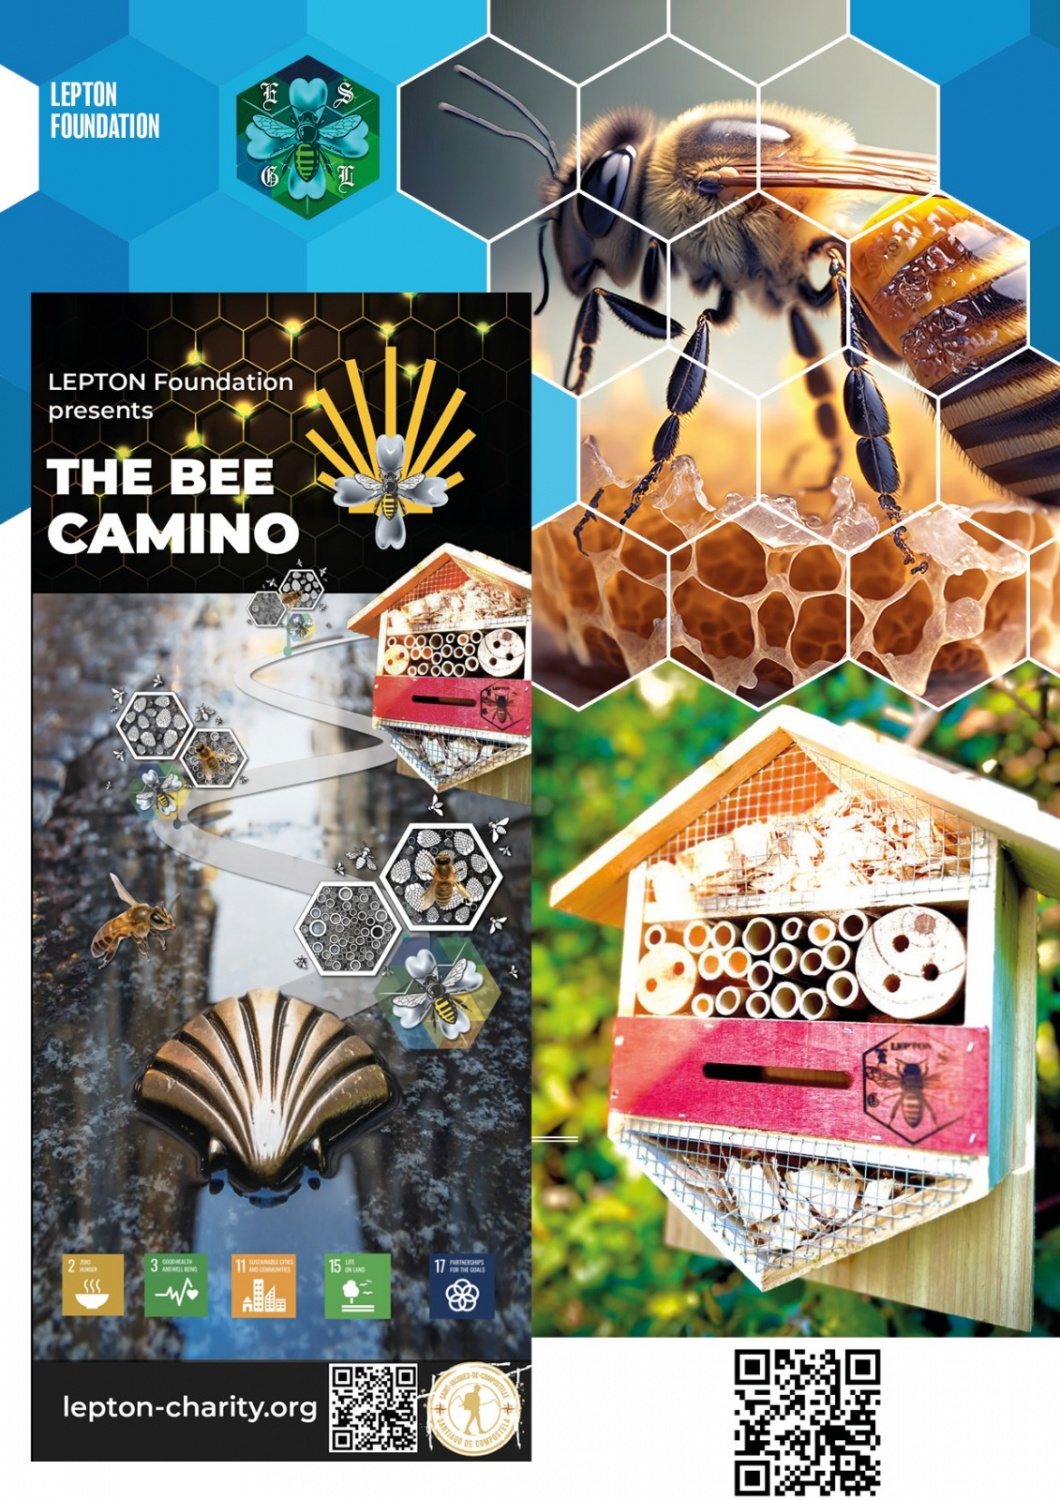 The Bee Camino: Lepton Foundation's Trailblazing Initiative for Pollinator Conservation and Education